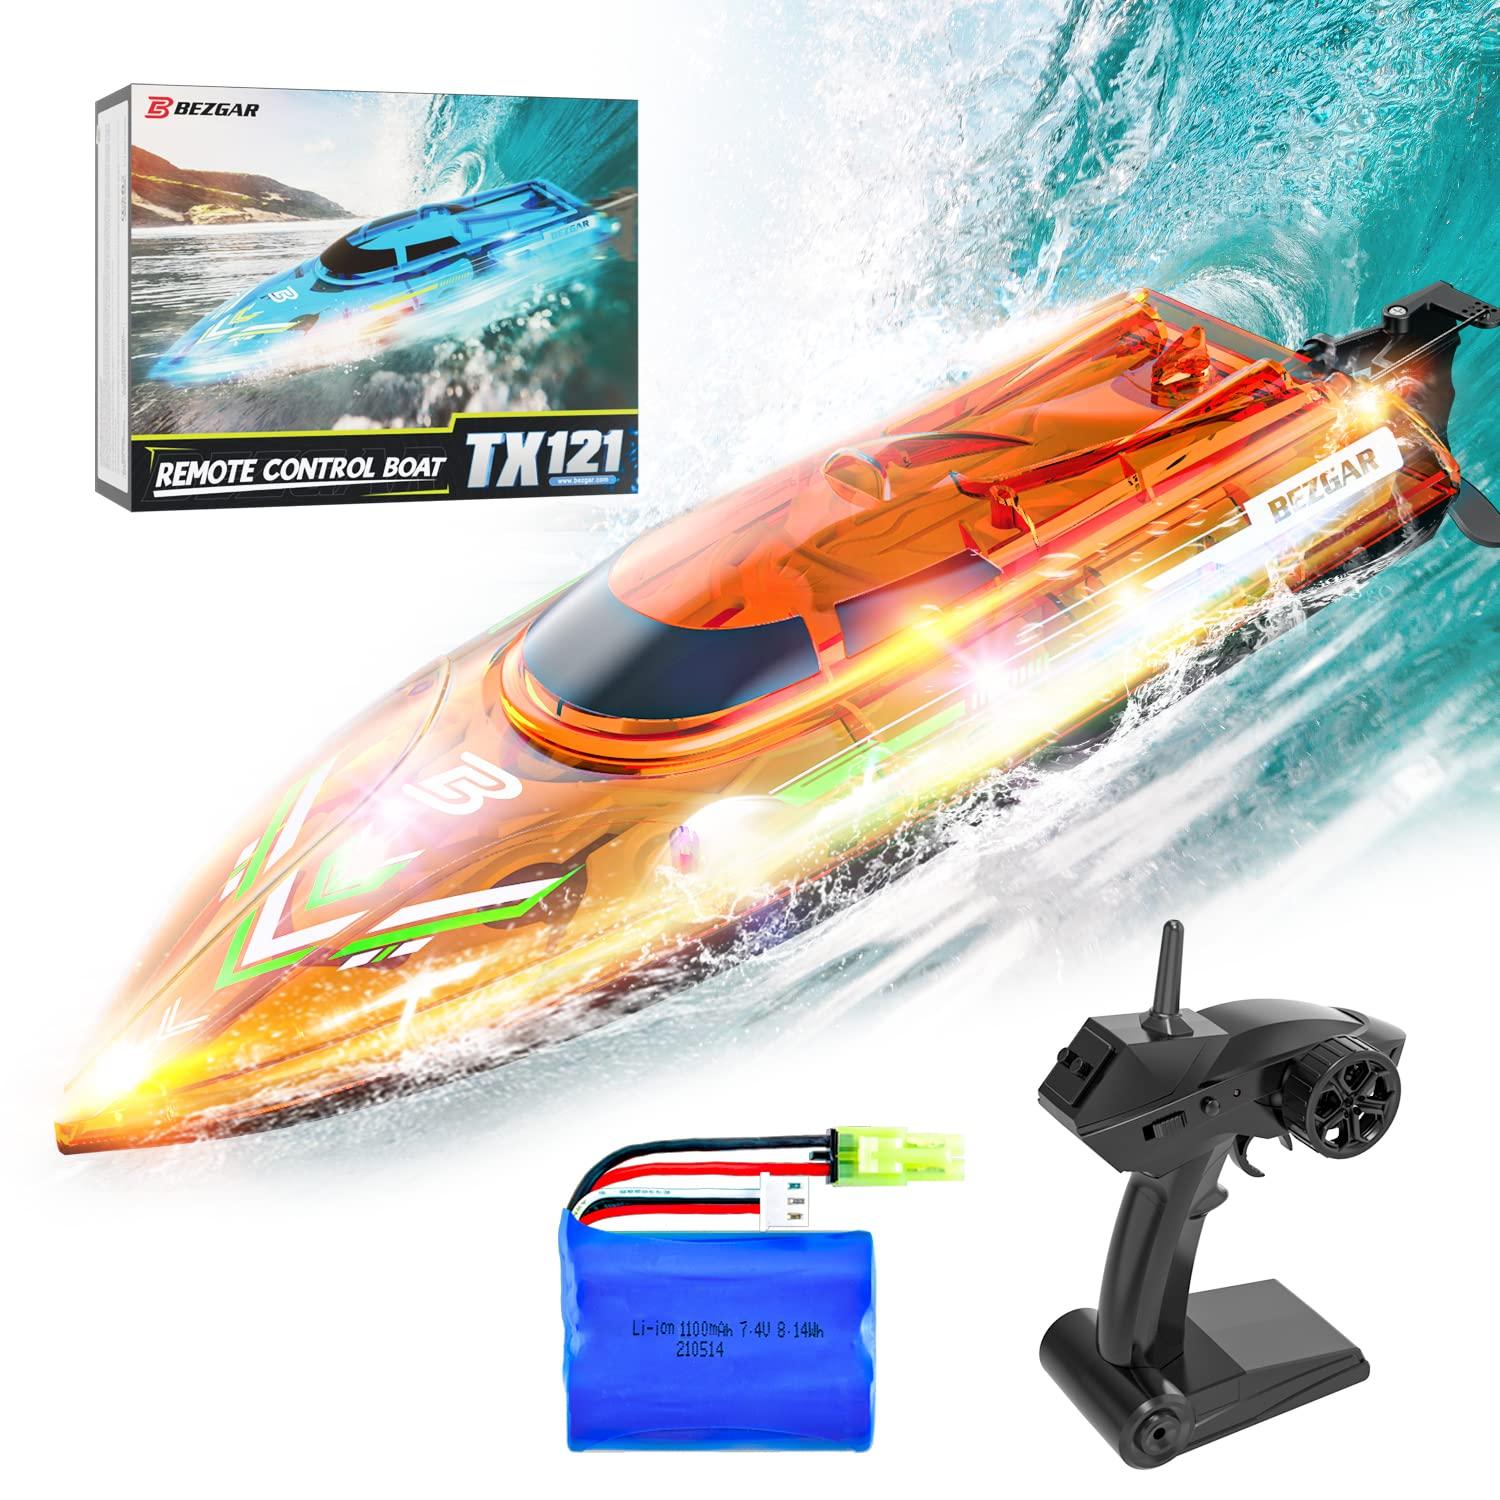 Good Remote Control Boats: Characteristics and sizes